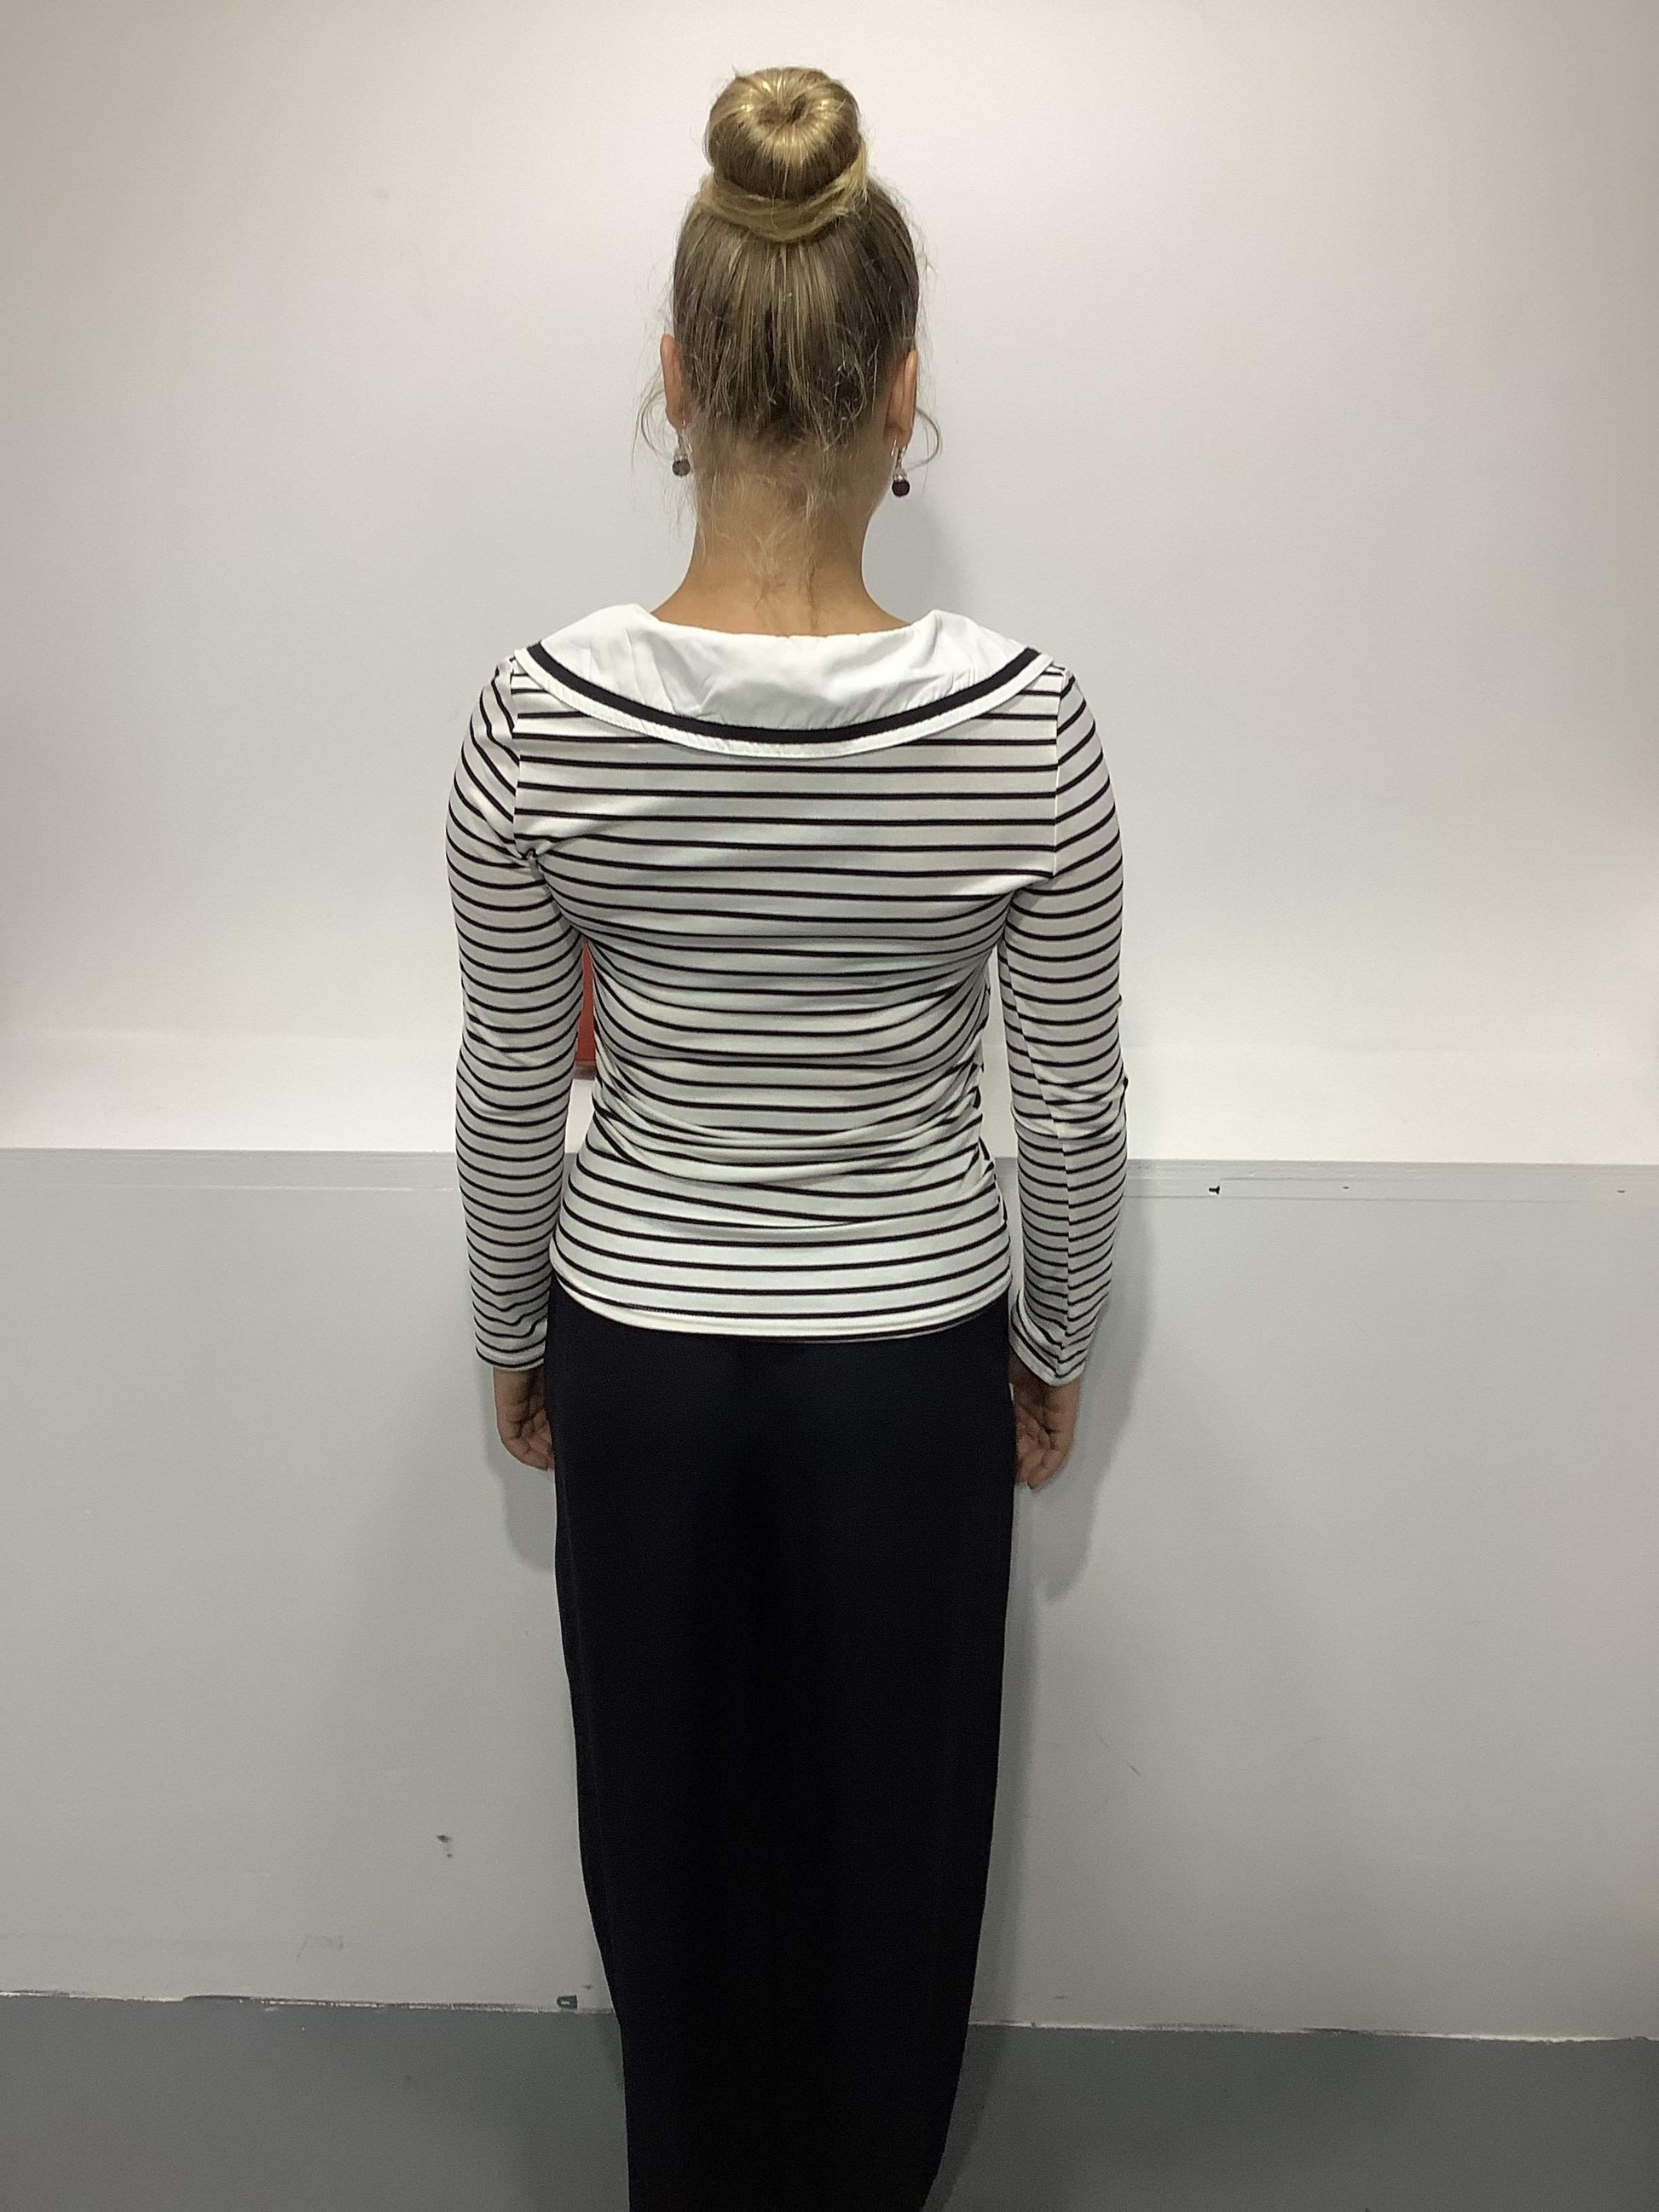 STRIPED TOP-Bitter and Better-fashion,gestreept,gestreepte top,matrozen kraag,streep,striped,striped top,sustainable,vintage,zwart wit,zwart witte top